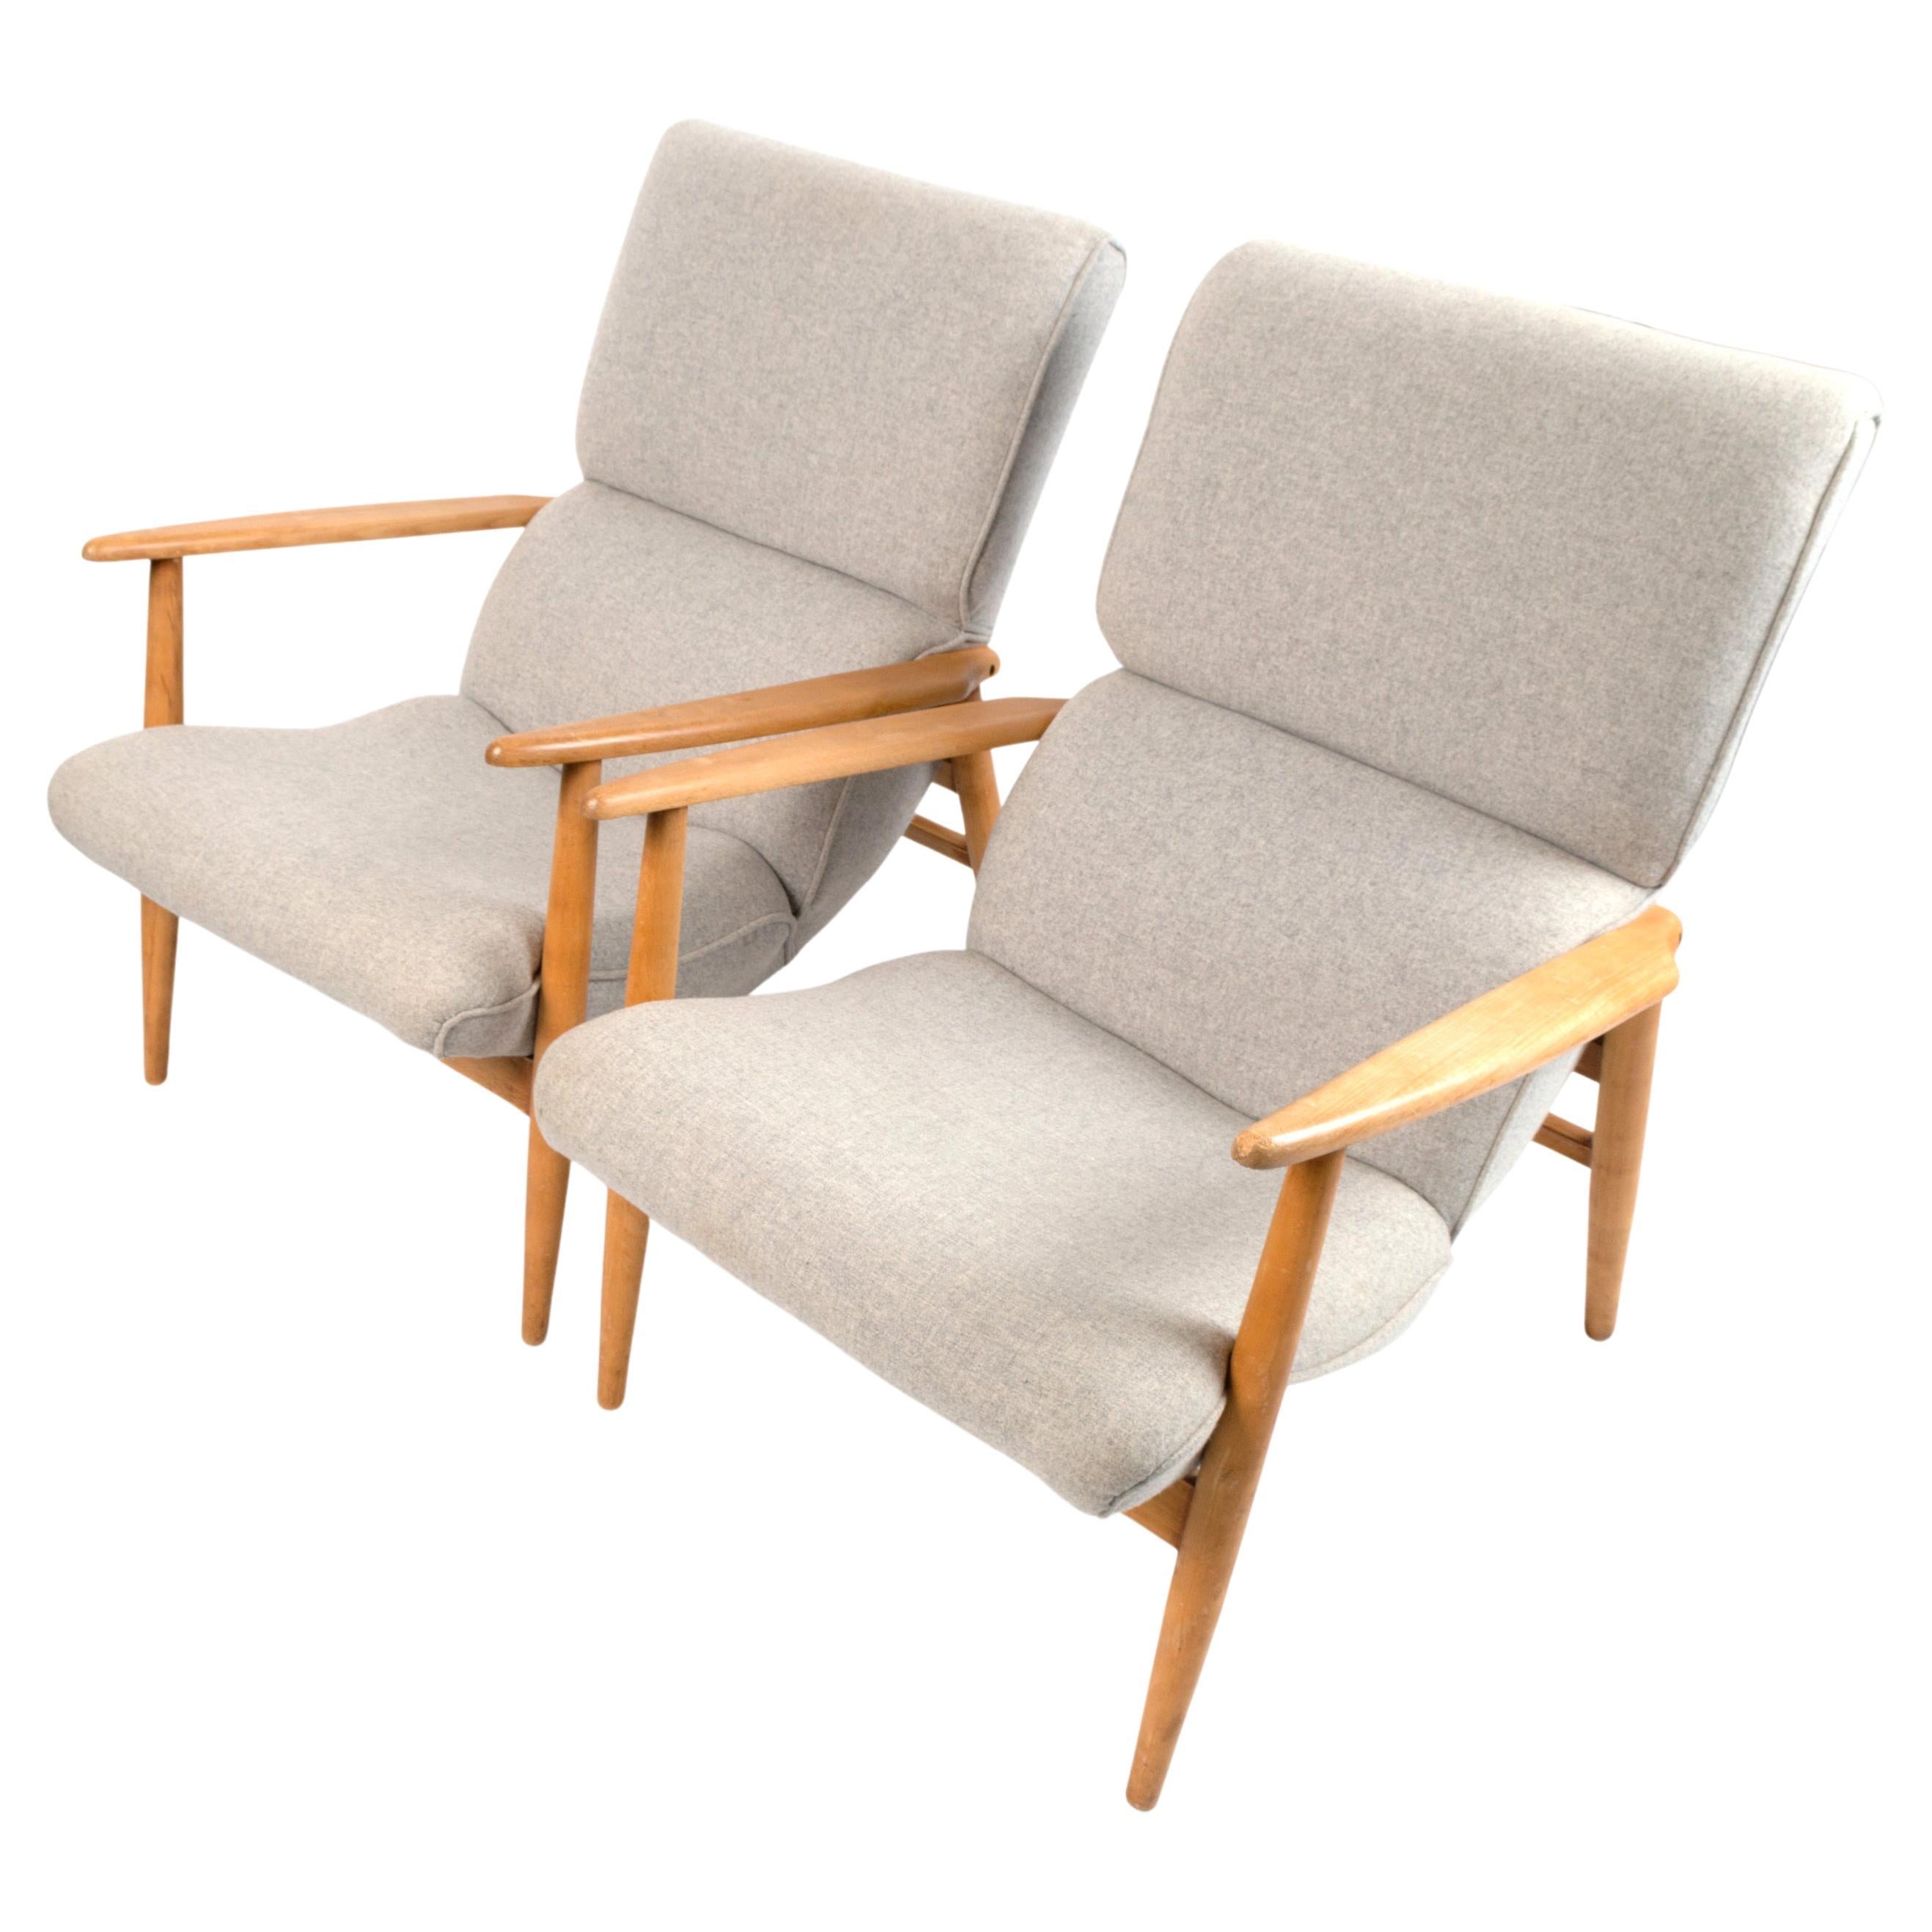 A pair of mid-century Danish lounge chairs armchairs C.1960.
Constructed in a beech frame and upholstered in a classic mid-century grey wool fabric.
In excellent condition commensurate of age.